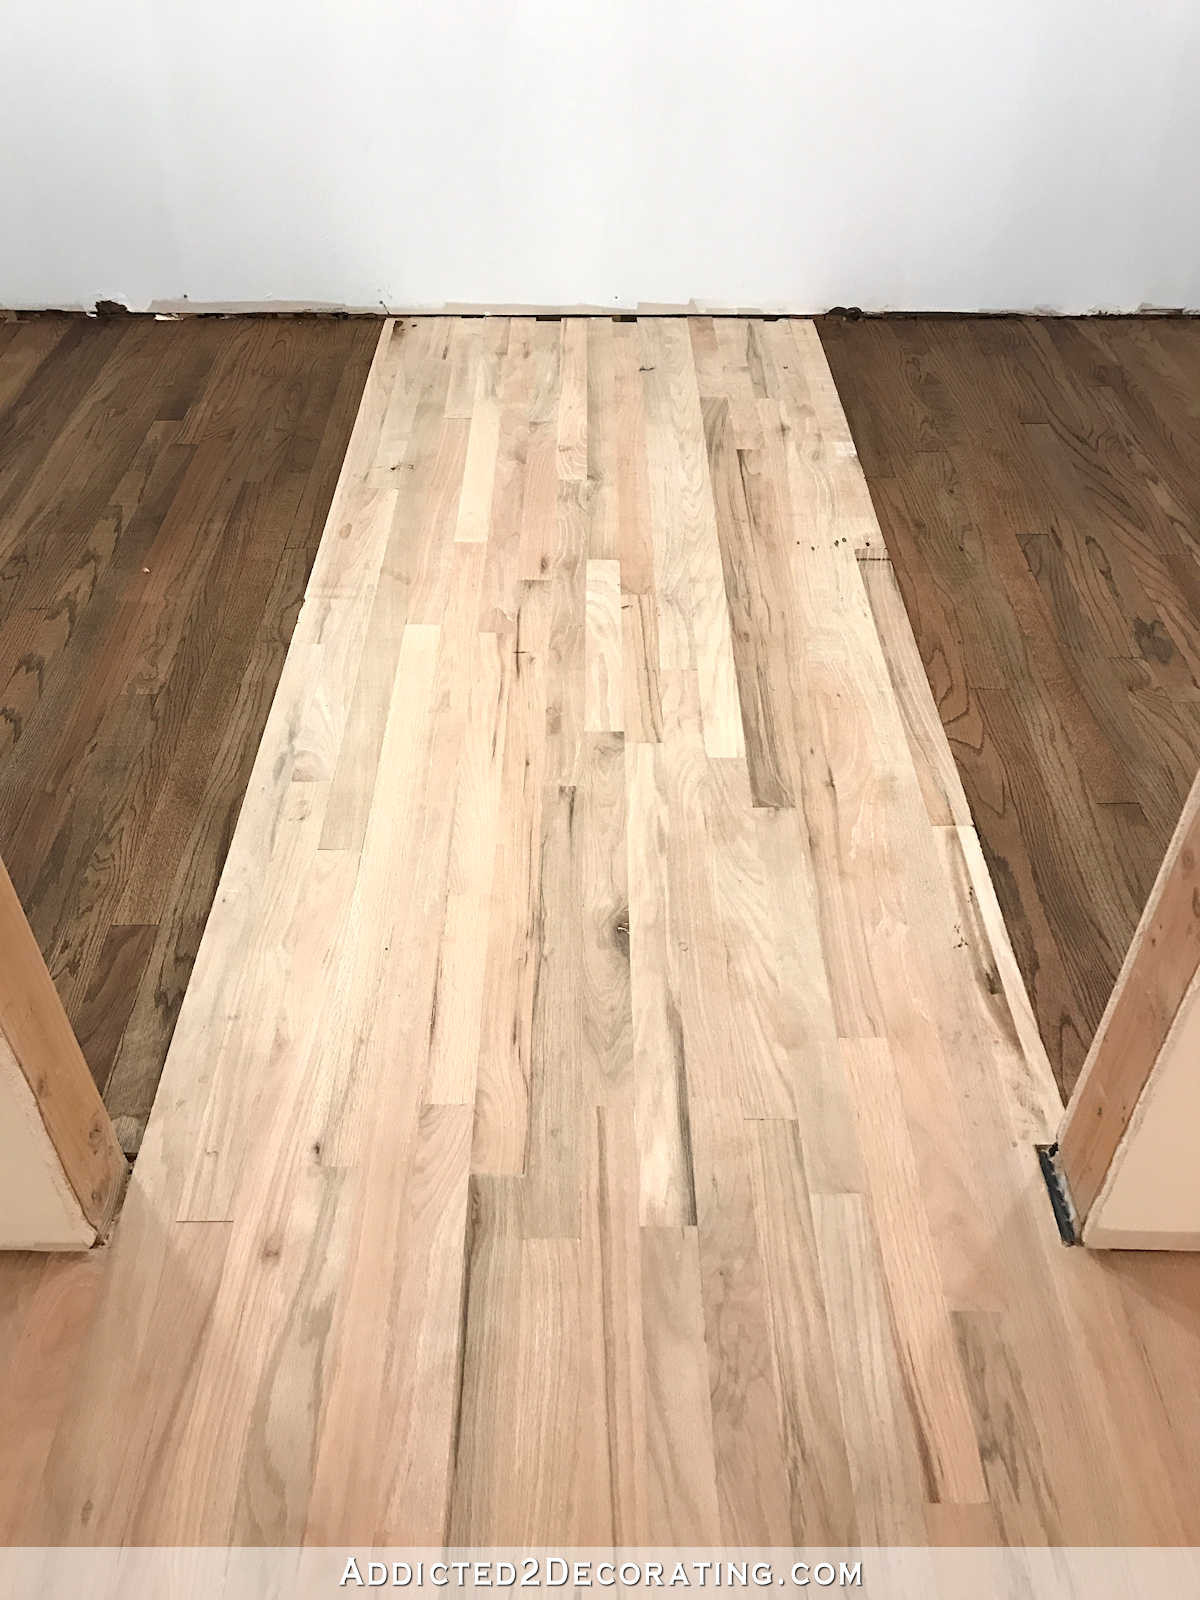 17 Lovable Hardwood Floor Stain Not Drying 2022 free download hardwood floor stain not drying of adventures in staining my red oak hardwood floors products process in staining red oak hardwood floors 11 stain on left and right sides of the